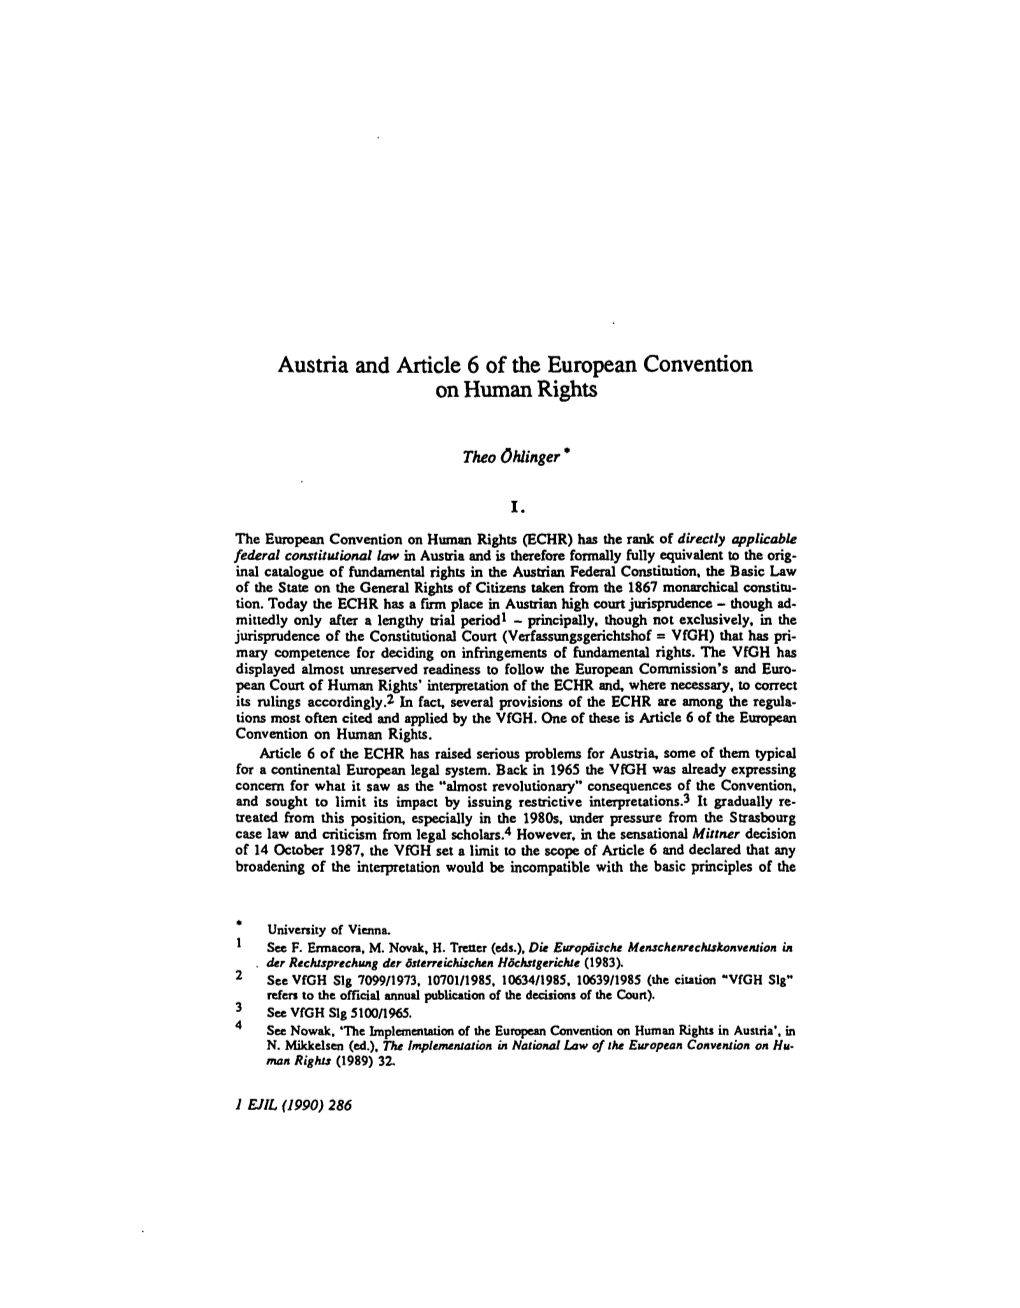 Austria and Article 6 of the European Convention on Human Rights